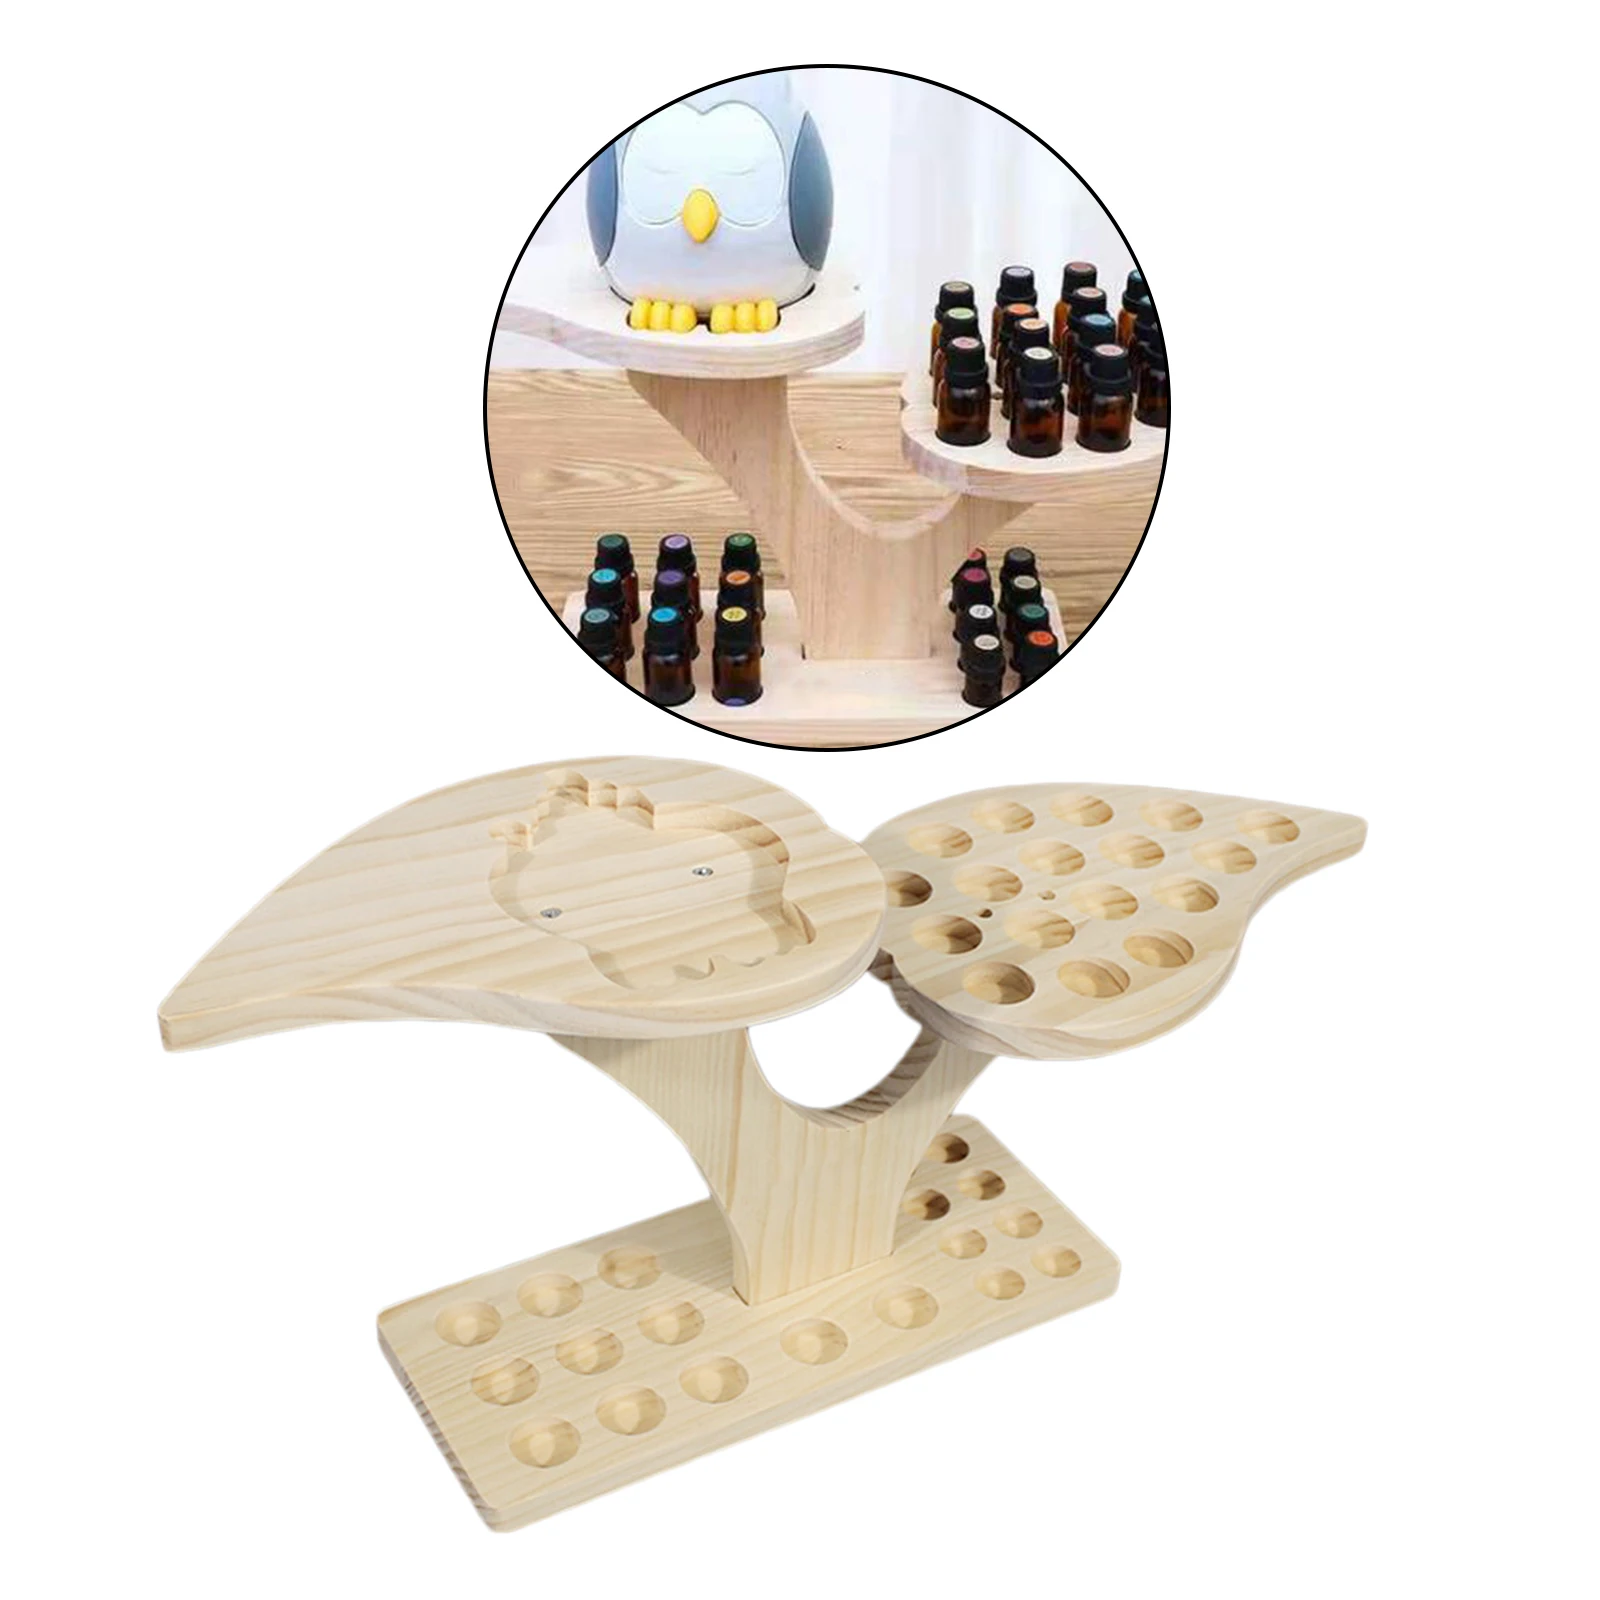 36 Slots Wooden Essential Oils Stand Diffuser Holder Carousel Box